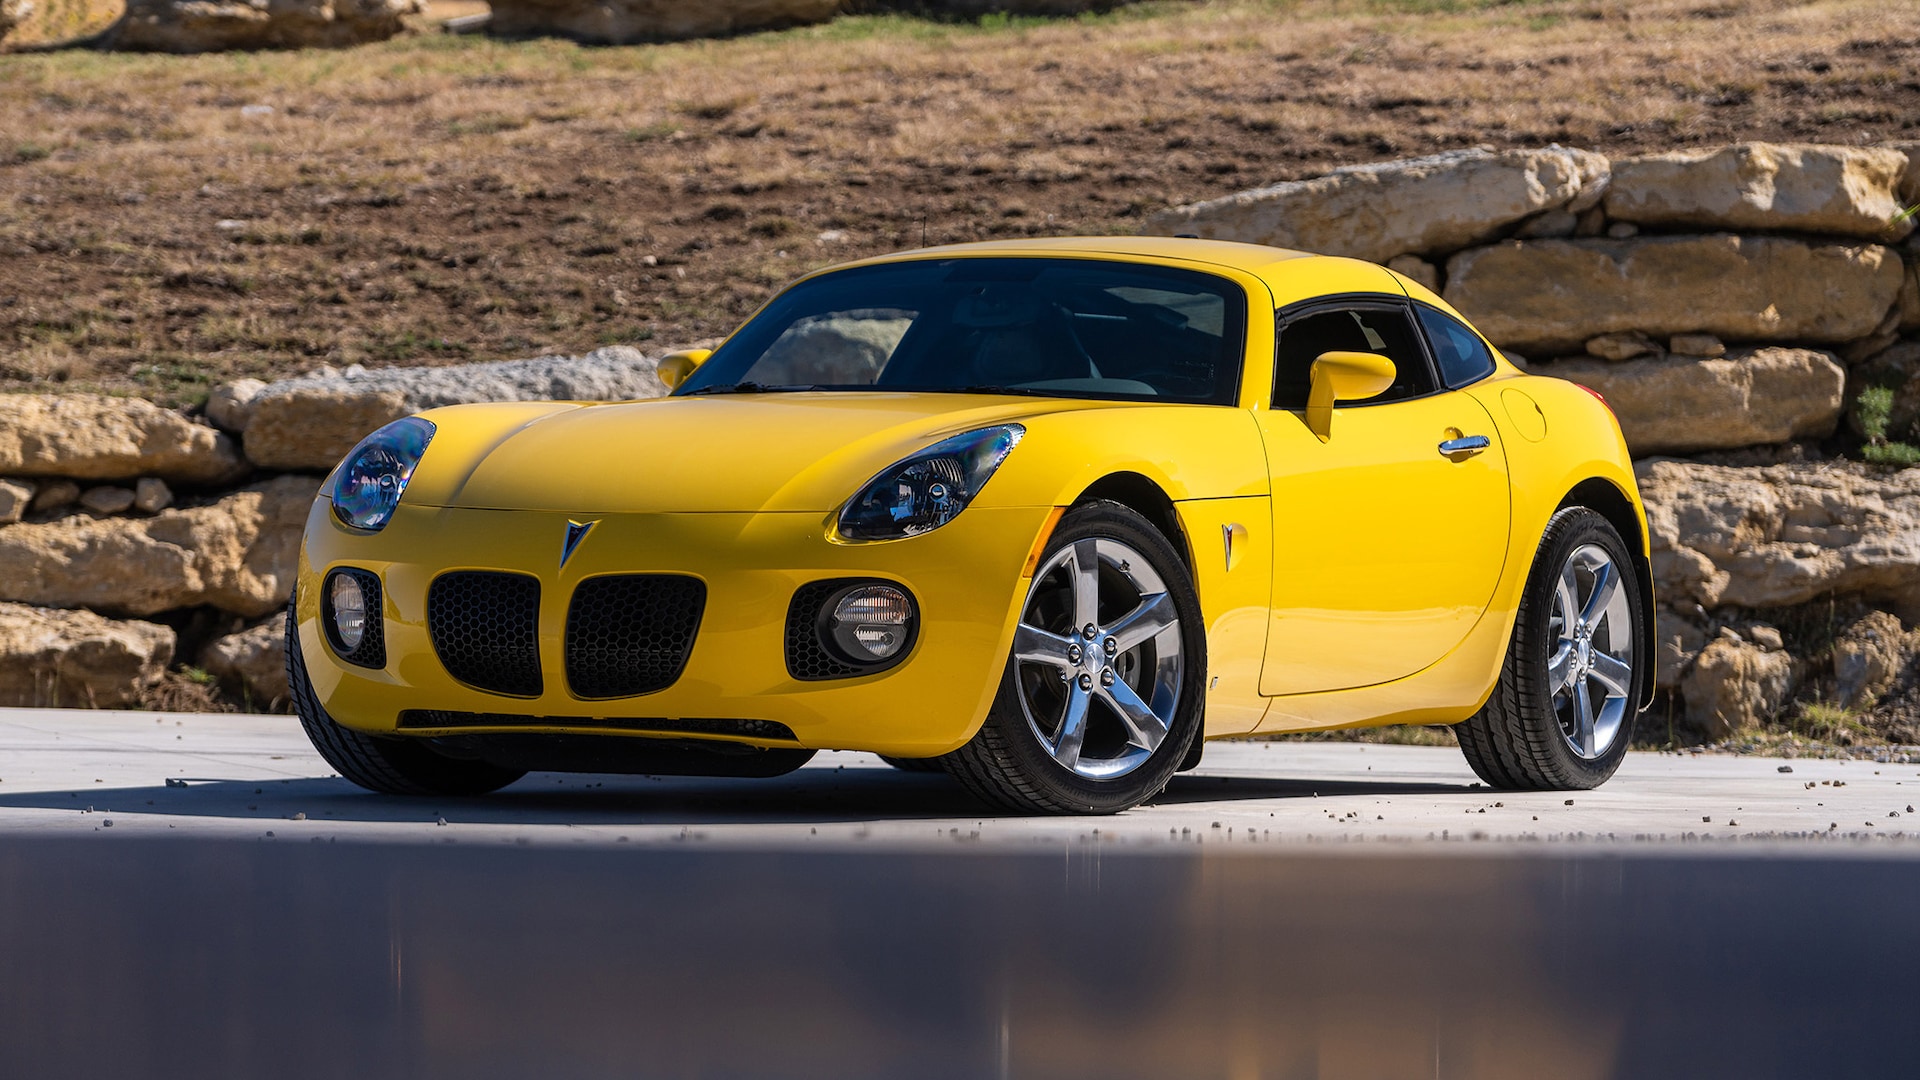 Like Weird Coupes? This 2009 Pontiac Solstice GXP Could Be Yours